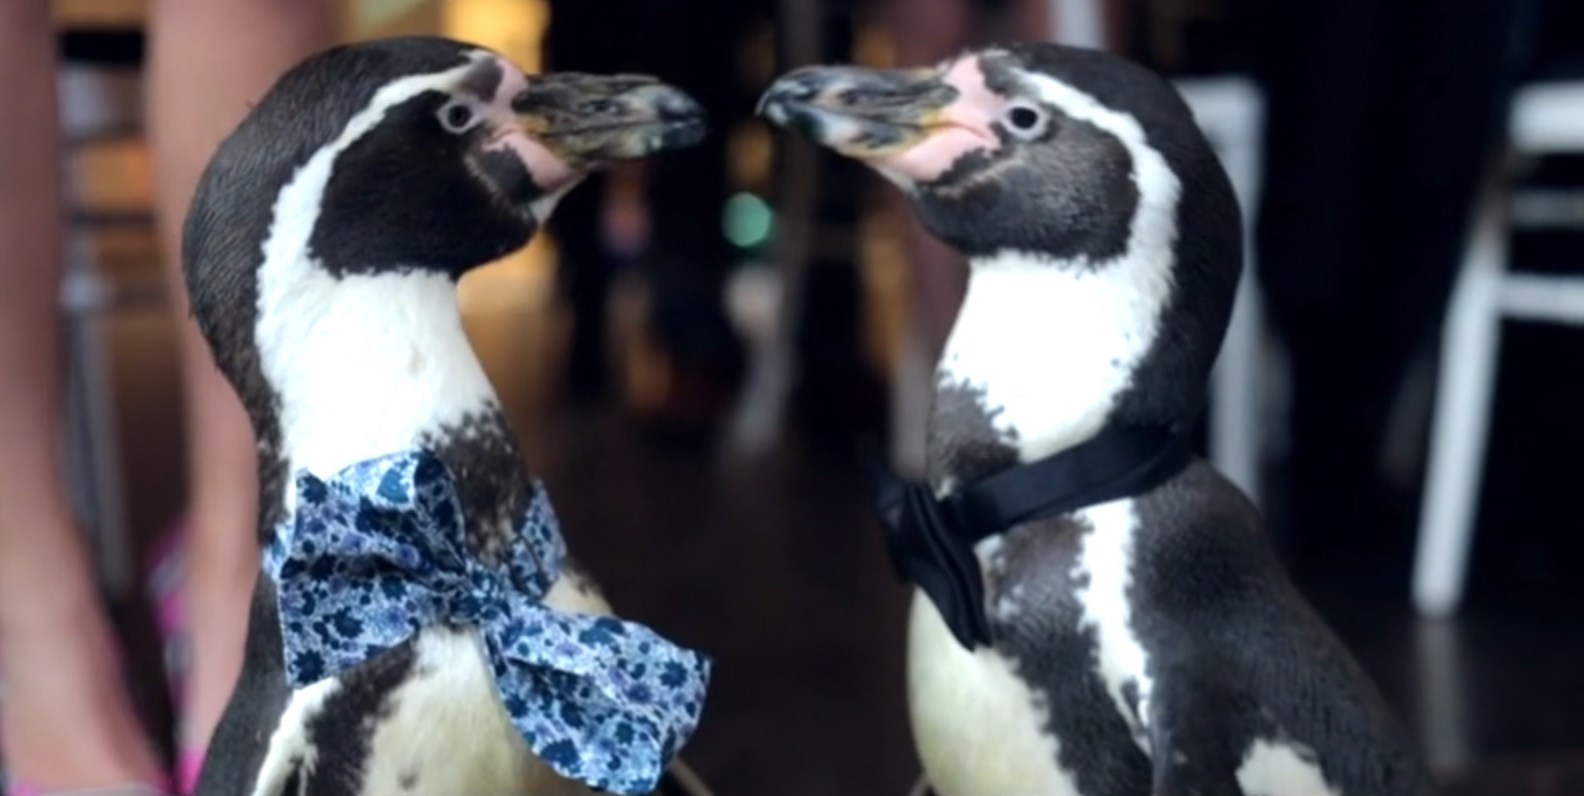 This gay penguin wedding is everything we need on Valentine's Day | PinkNews